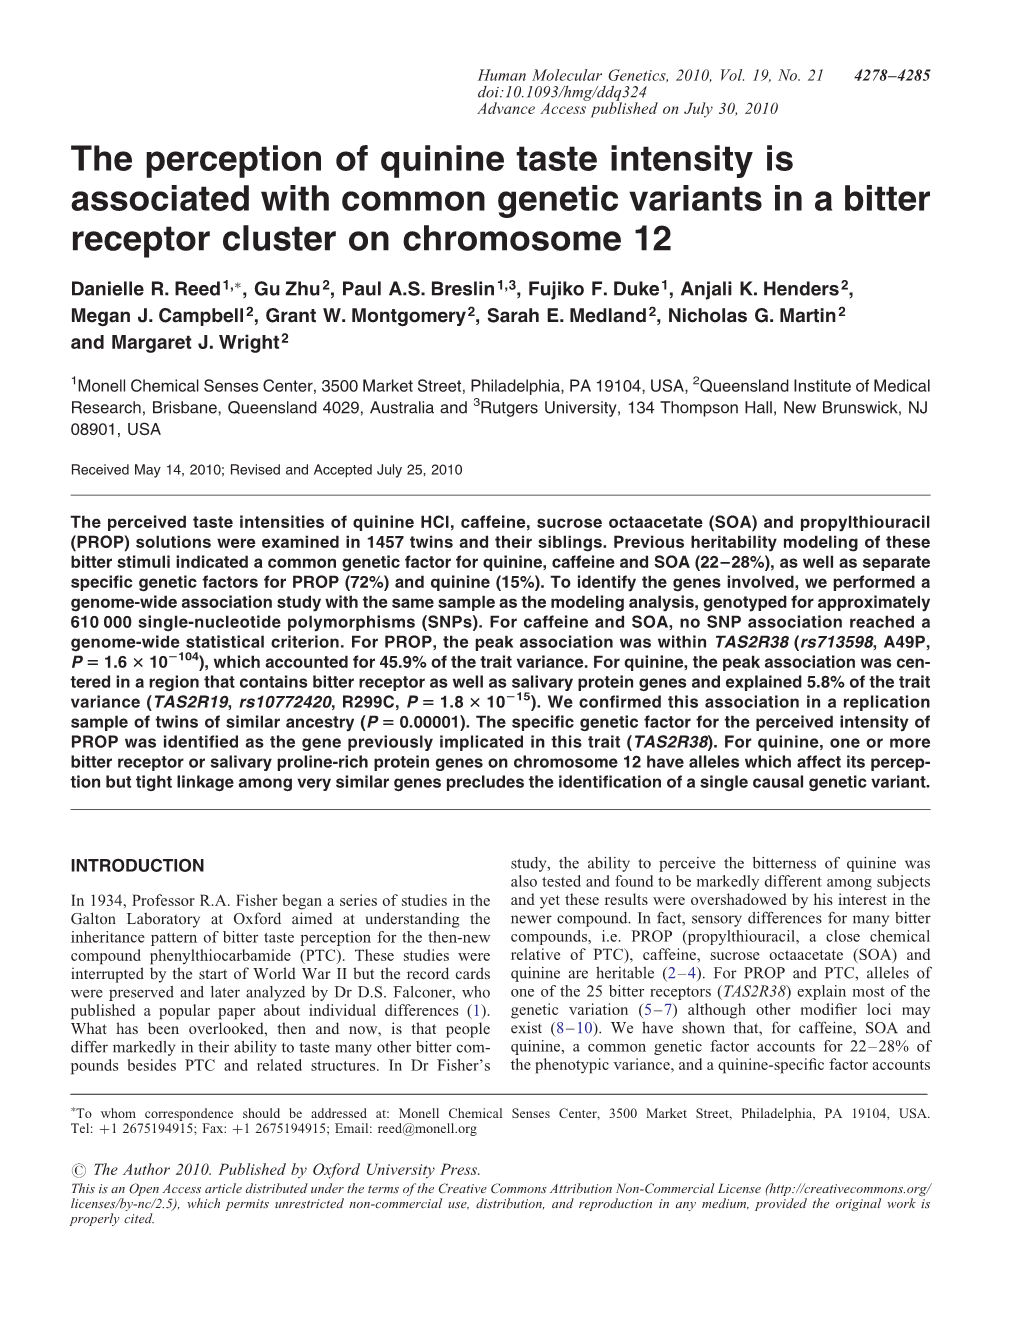 The Perception of Quinine Taste Intensity Is Associated with Common Genetic Variants in a Bitter Receptor Cluster on Chromosome 12